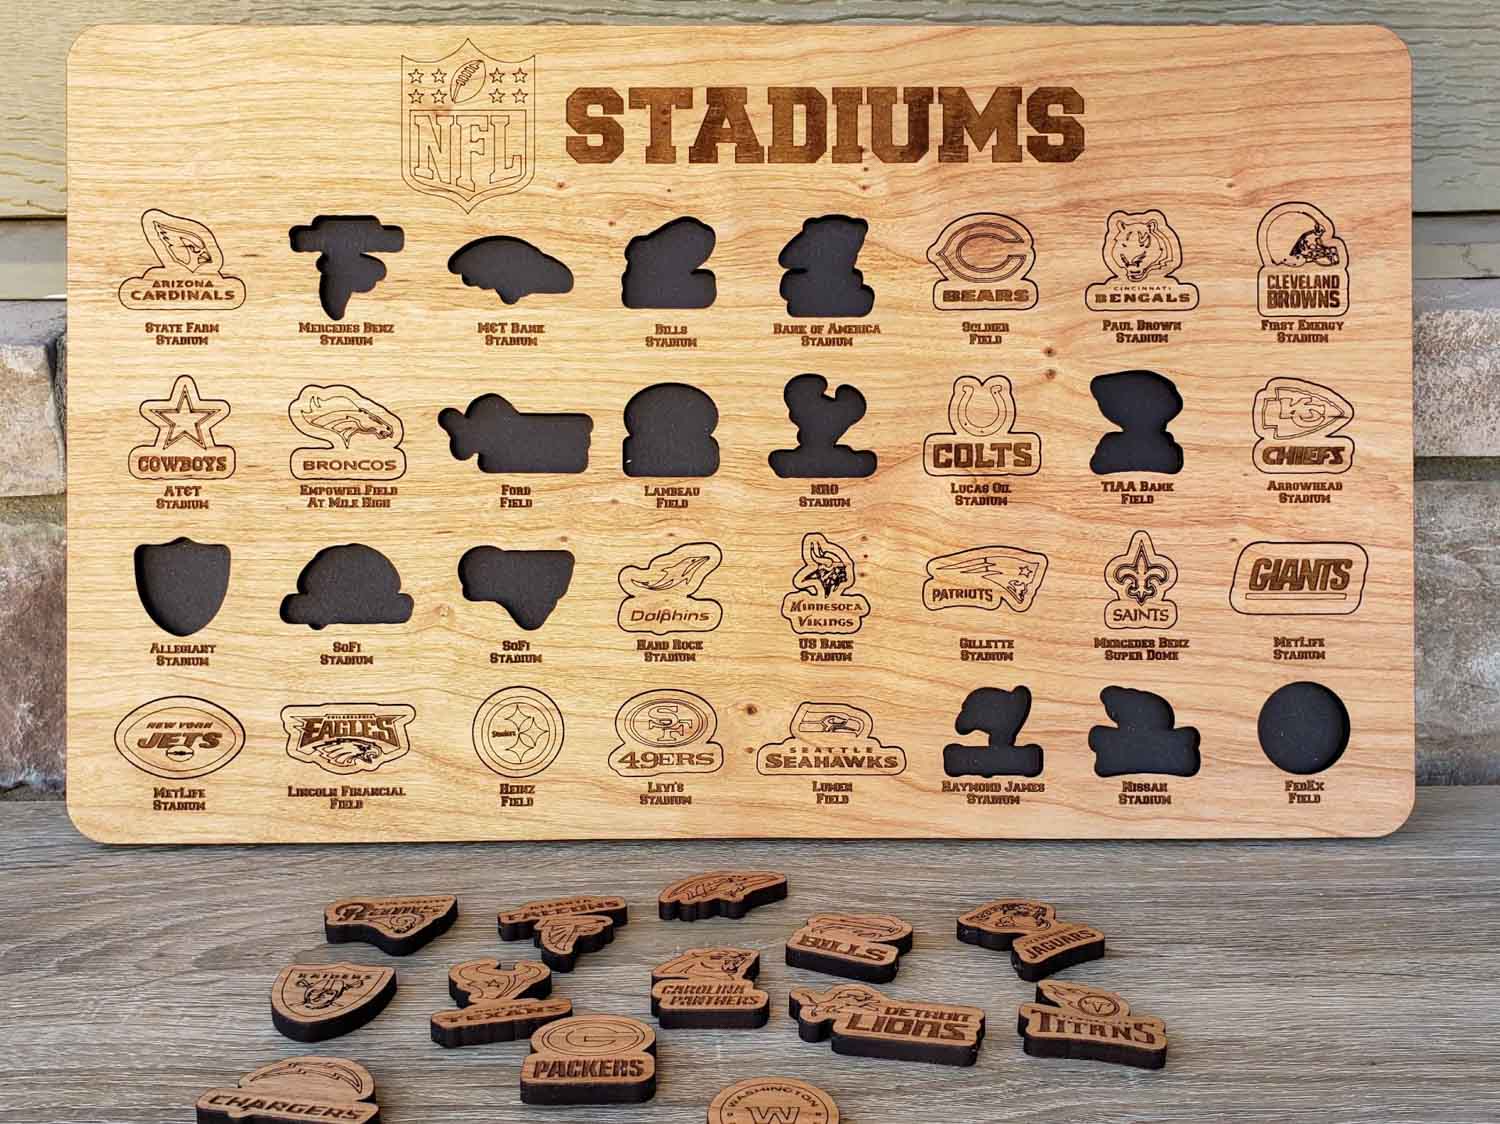 Photos of all the NFL stadiums